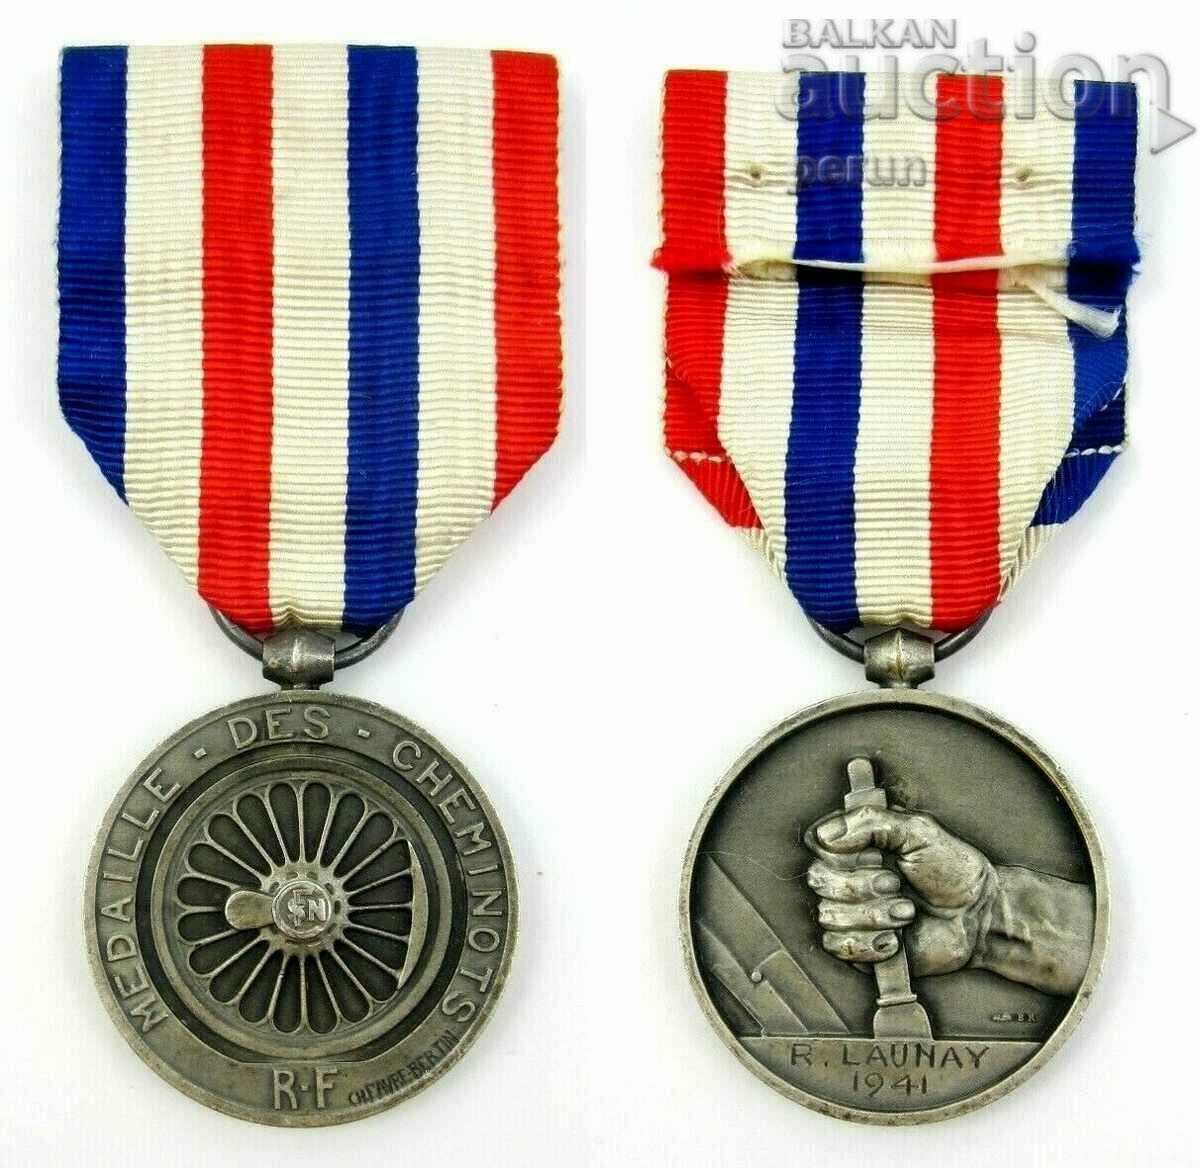 Honorary Silver Medal of the French Railways-1941-Original